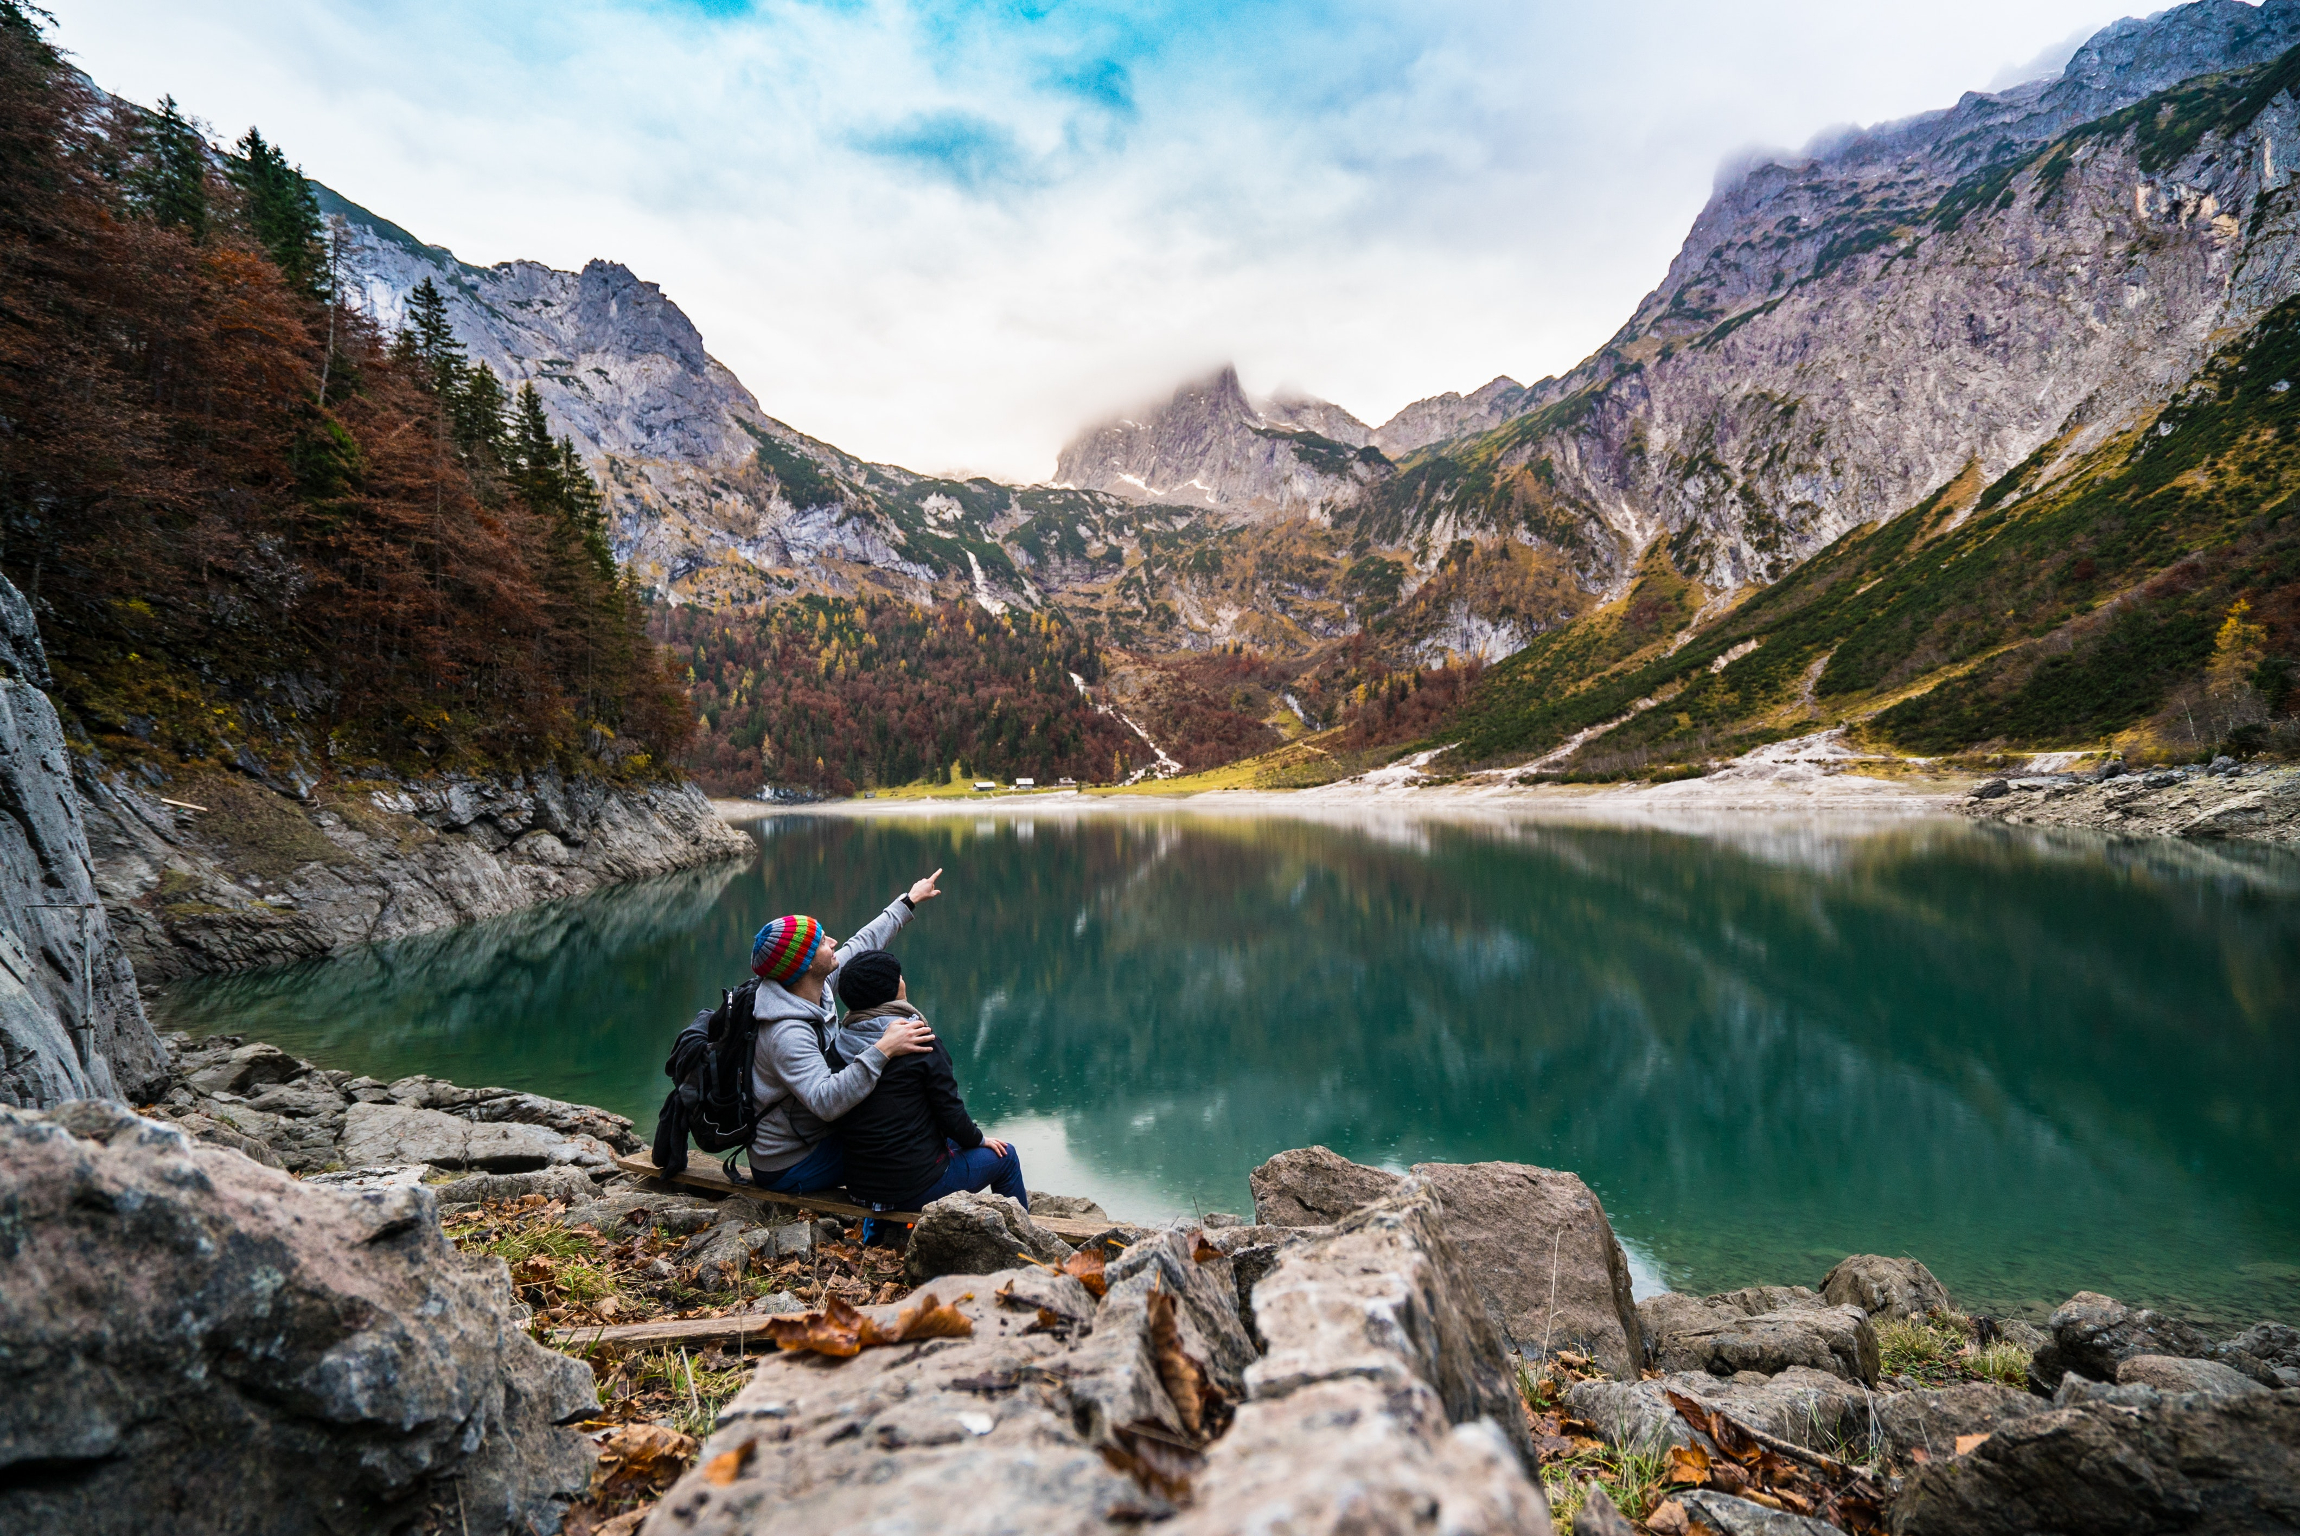 A couple sitting beside a lake. | Source: Pexels